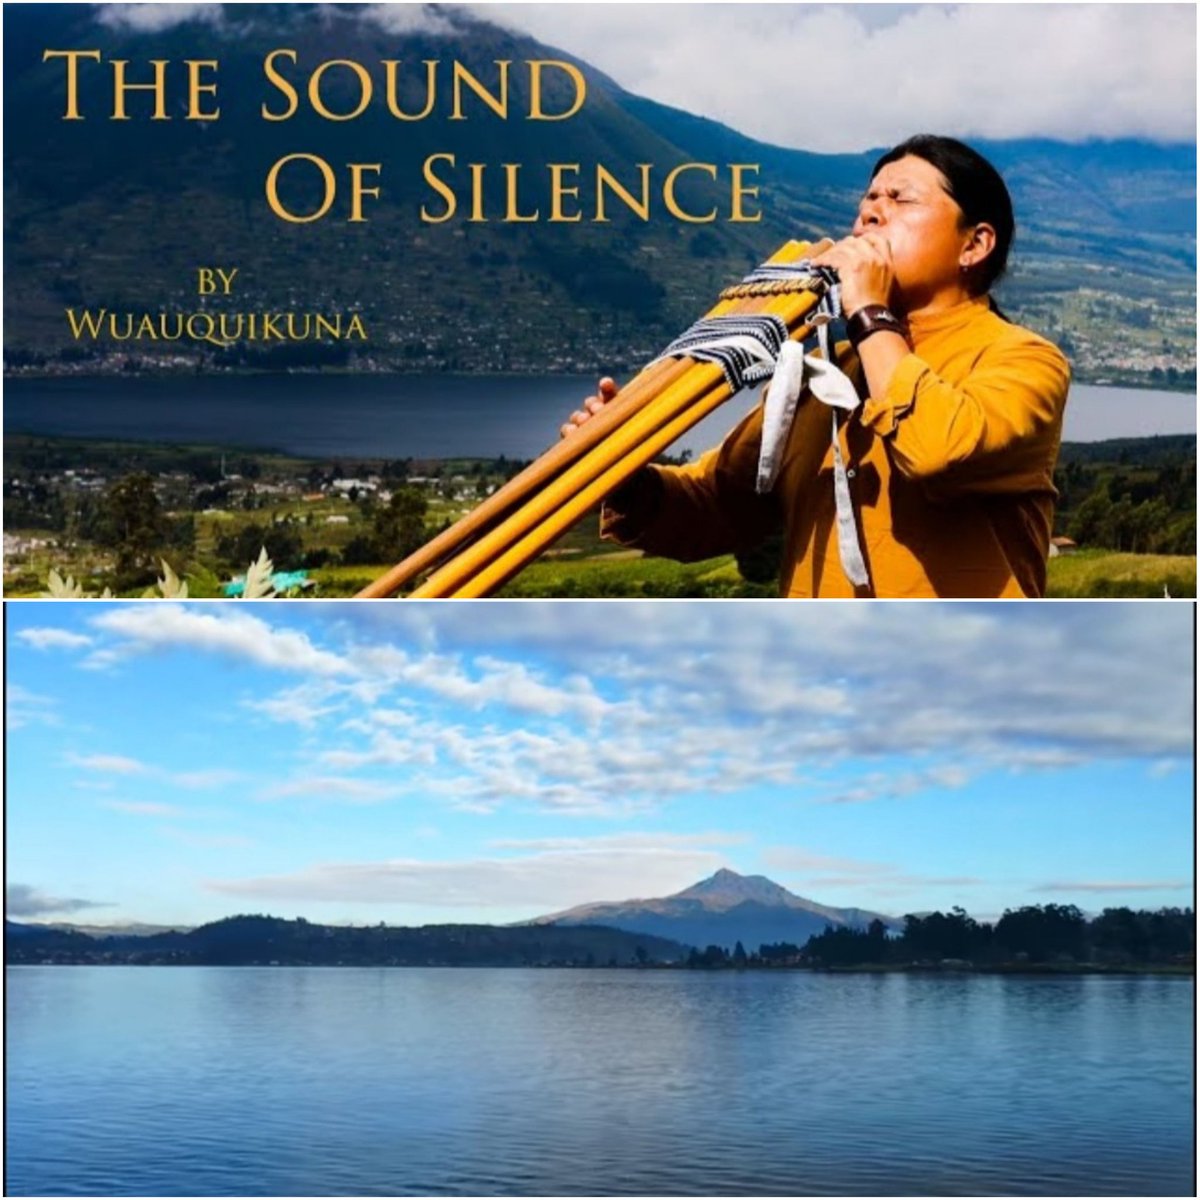 The Sound Of Silence by Wuauquikuna | Panflute | Toyos | #Ecuador
#EarthDay2021
#motherearthsounds
⤵️🙏🎧
youtu.be/ndUCNnhH03Q